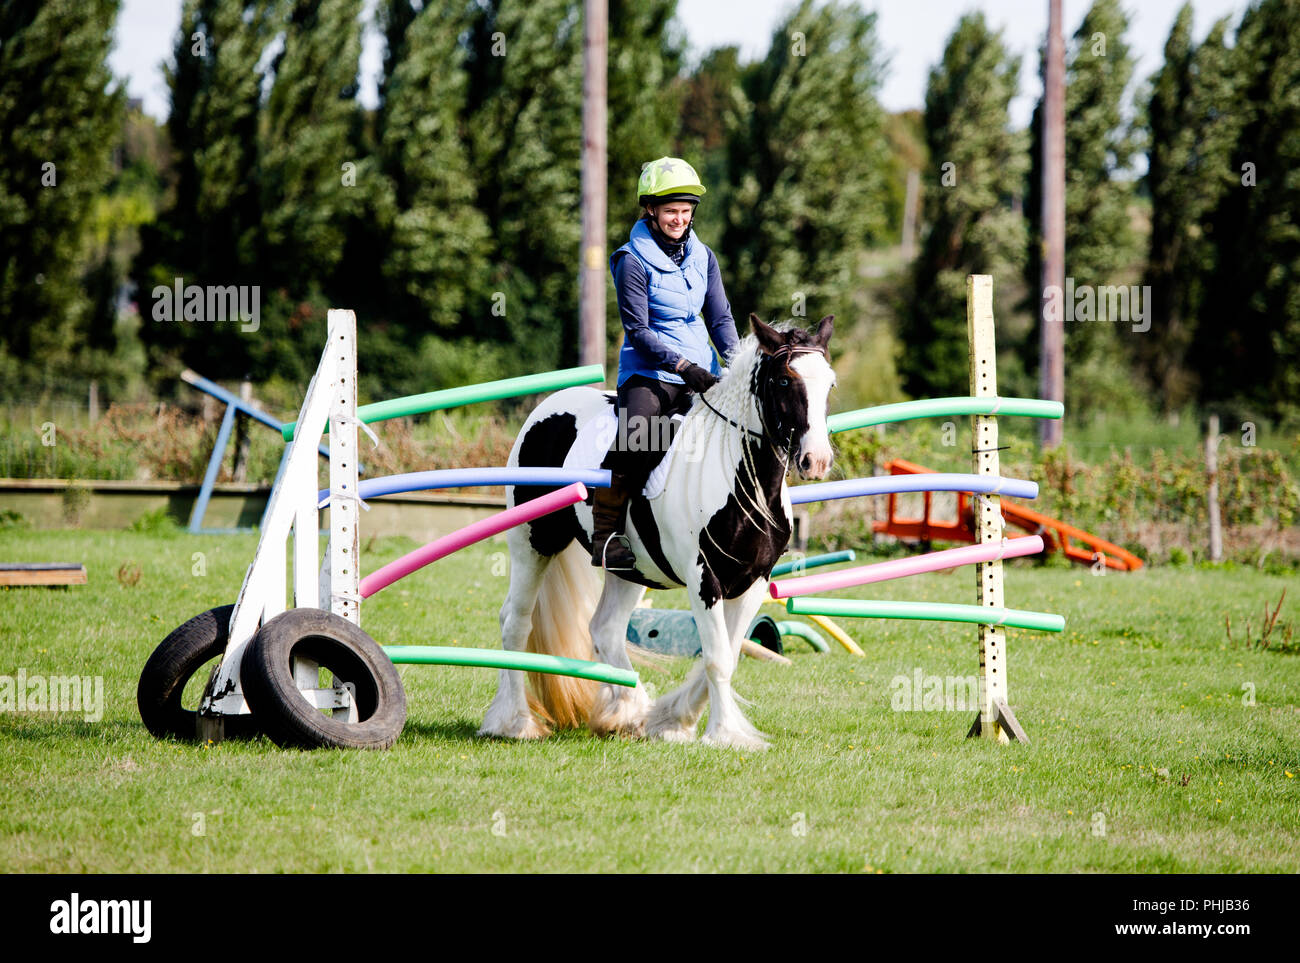 Horse agility where a horse is set obstacles that help it get used to things brushing against them also underfoot in a controlled environment. Stock Photo